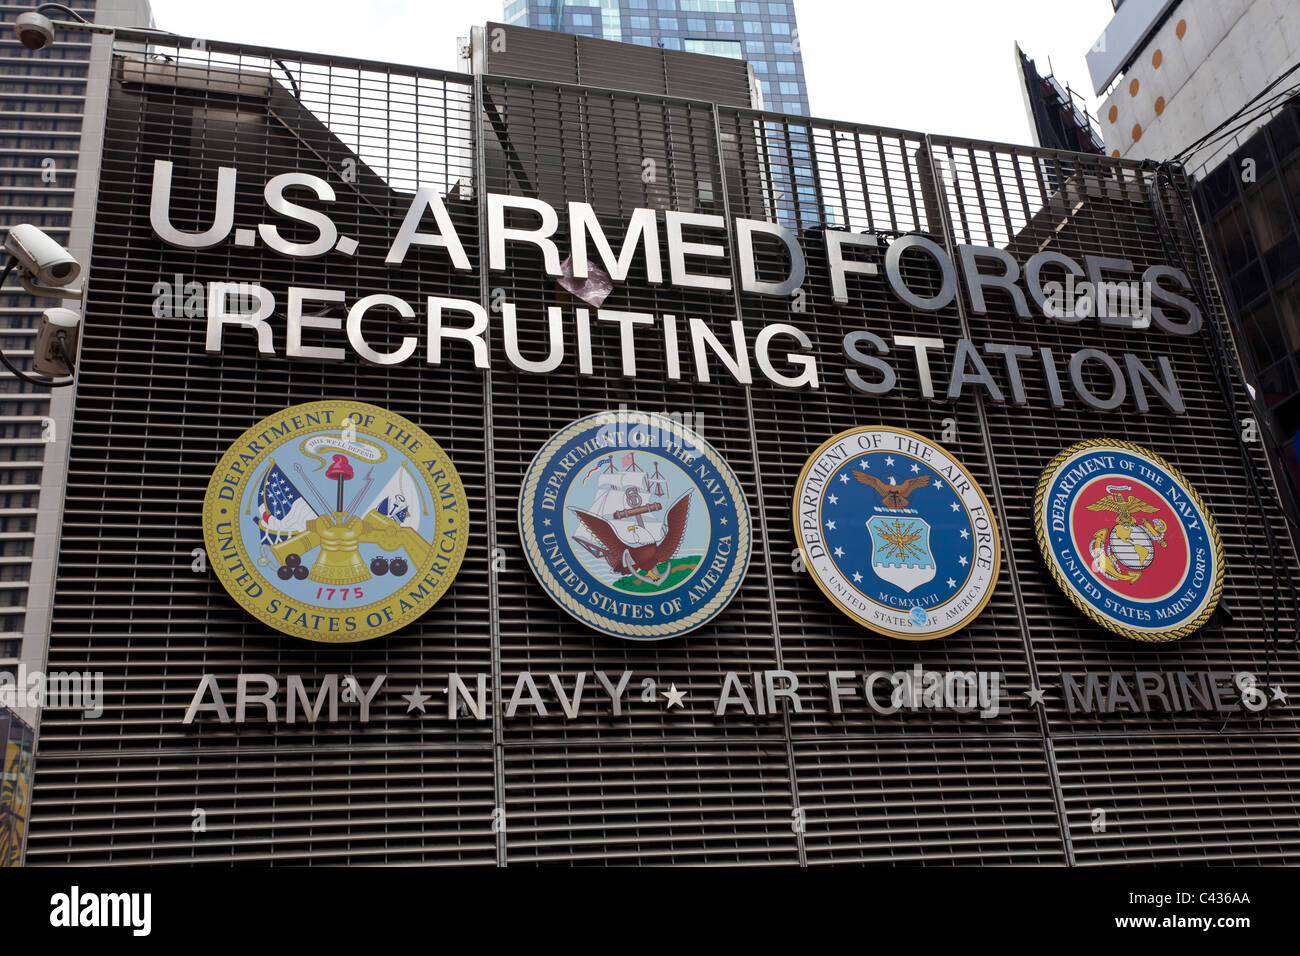 US Armed Forces Recruiting Station, Times Square, Manhattan, New York, USA Stock Photo